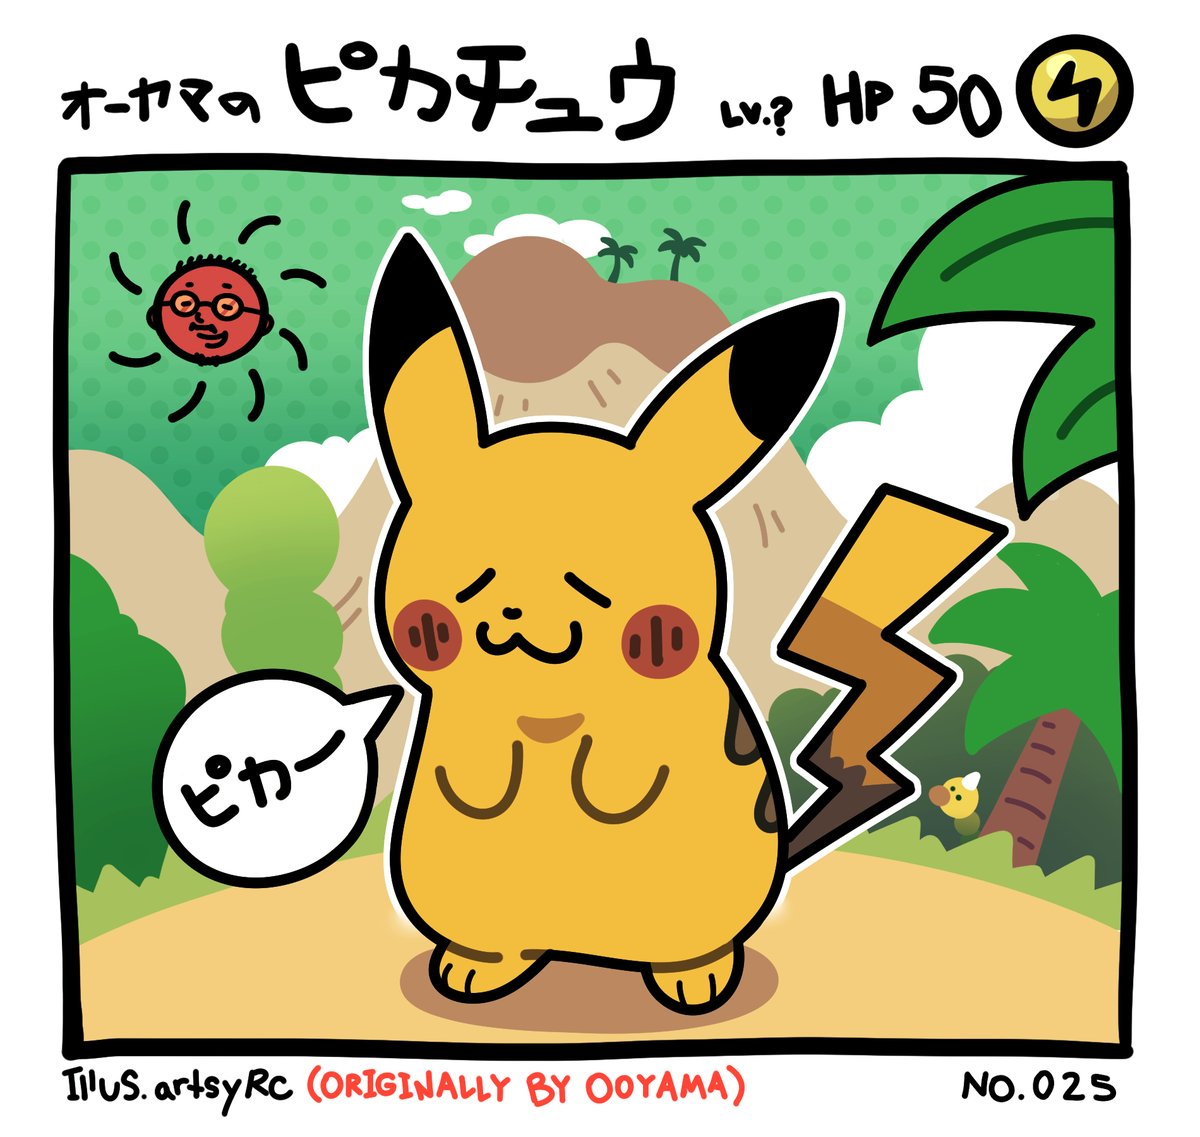 On this week's #Chuesday, I paid tribute to and redrew a favorite Pokemon card of mine (Ooyama's Pikachu!) 